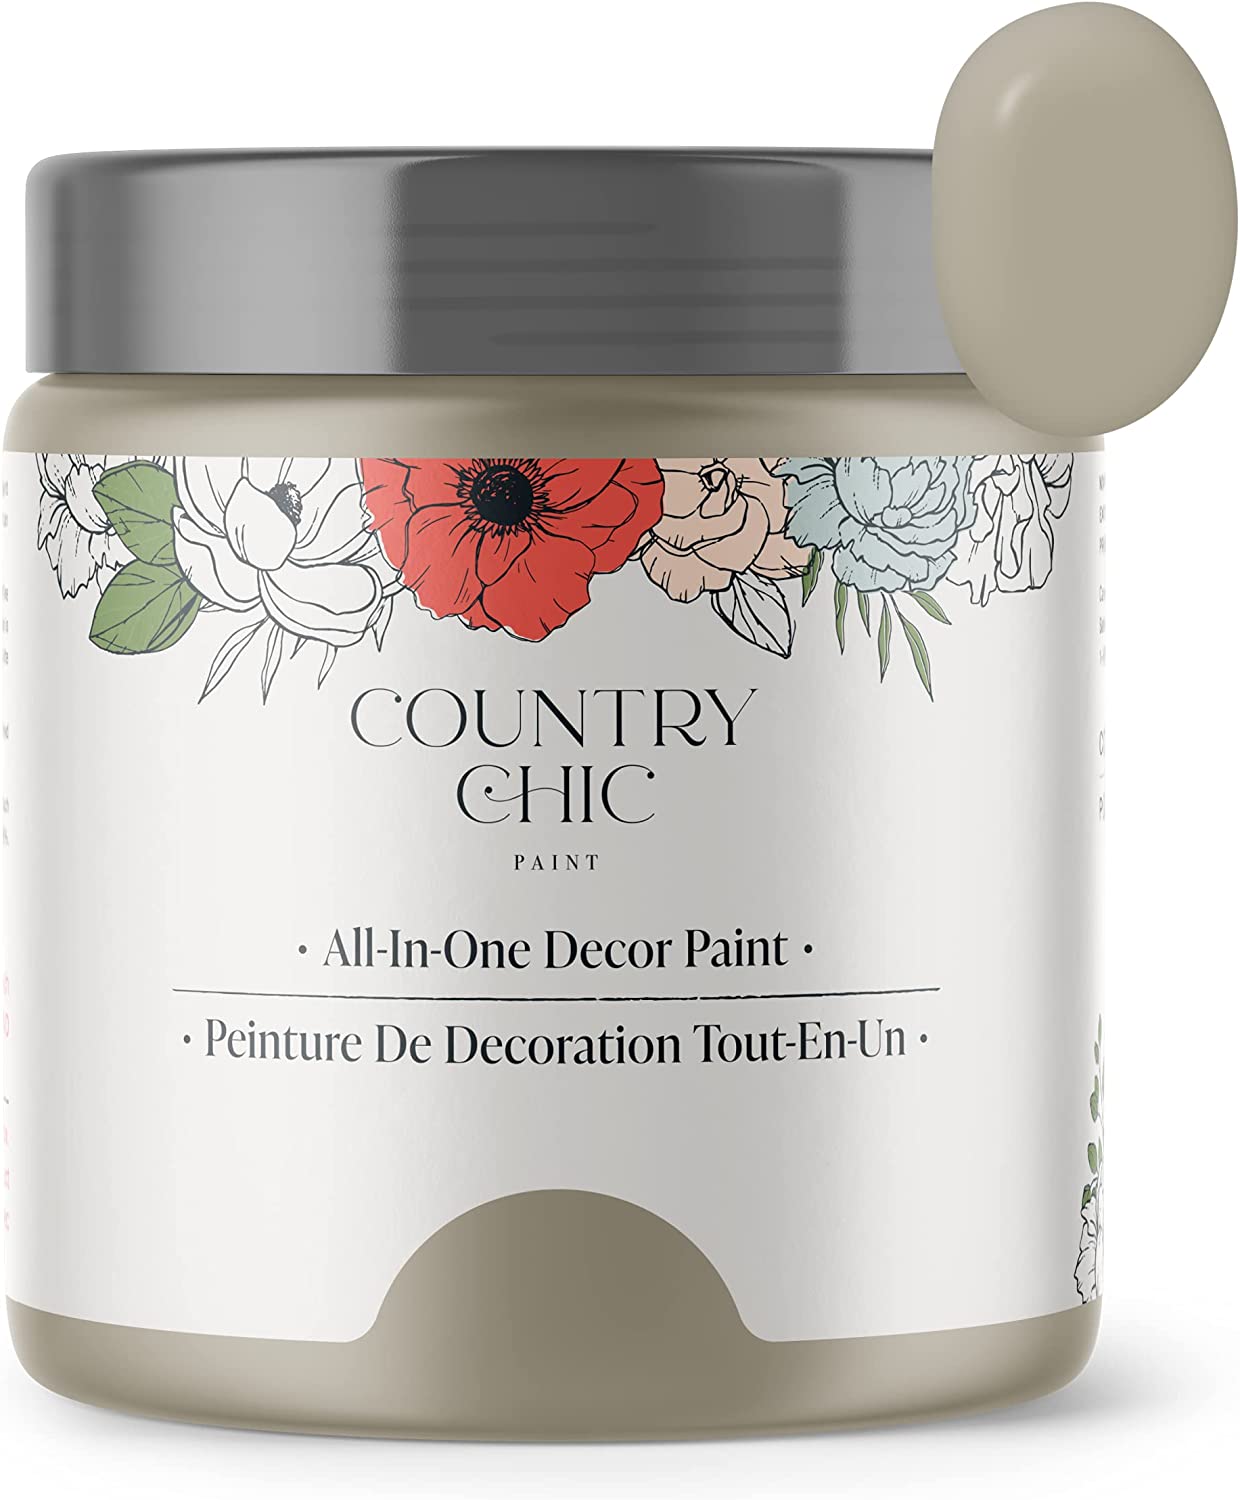 Country Chic Paint - Chalk Style All-in-One Paint for [...]